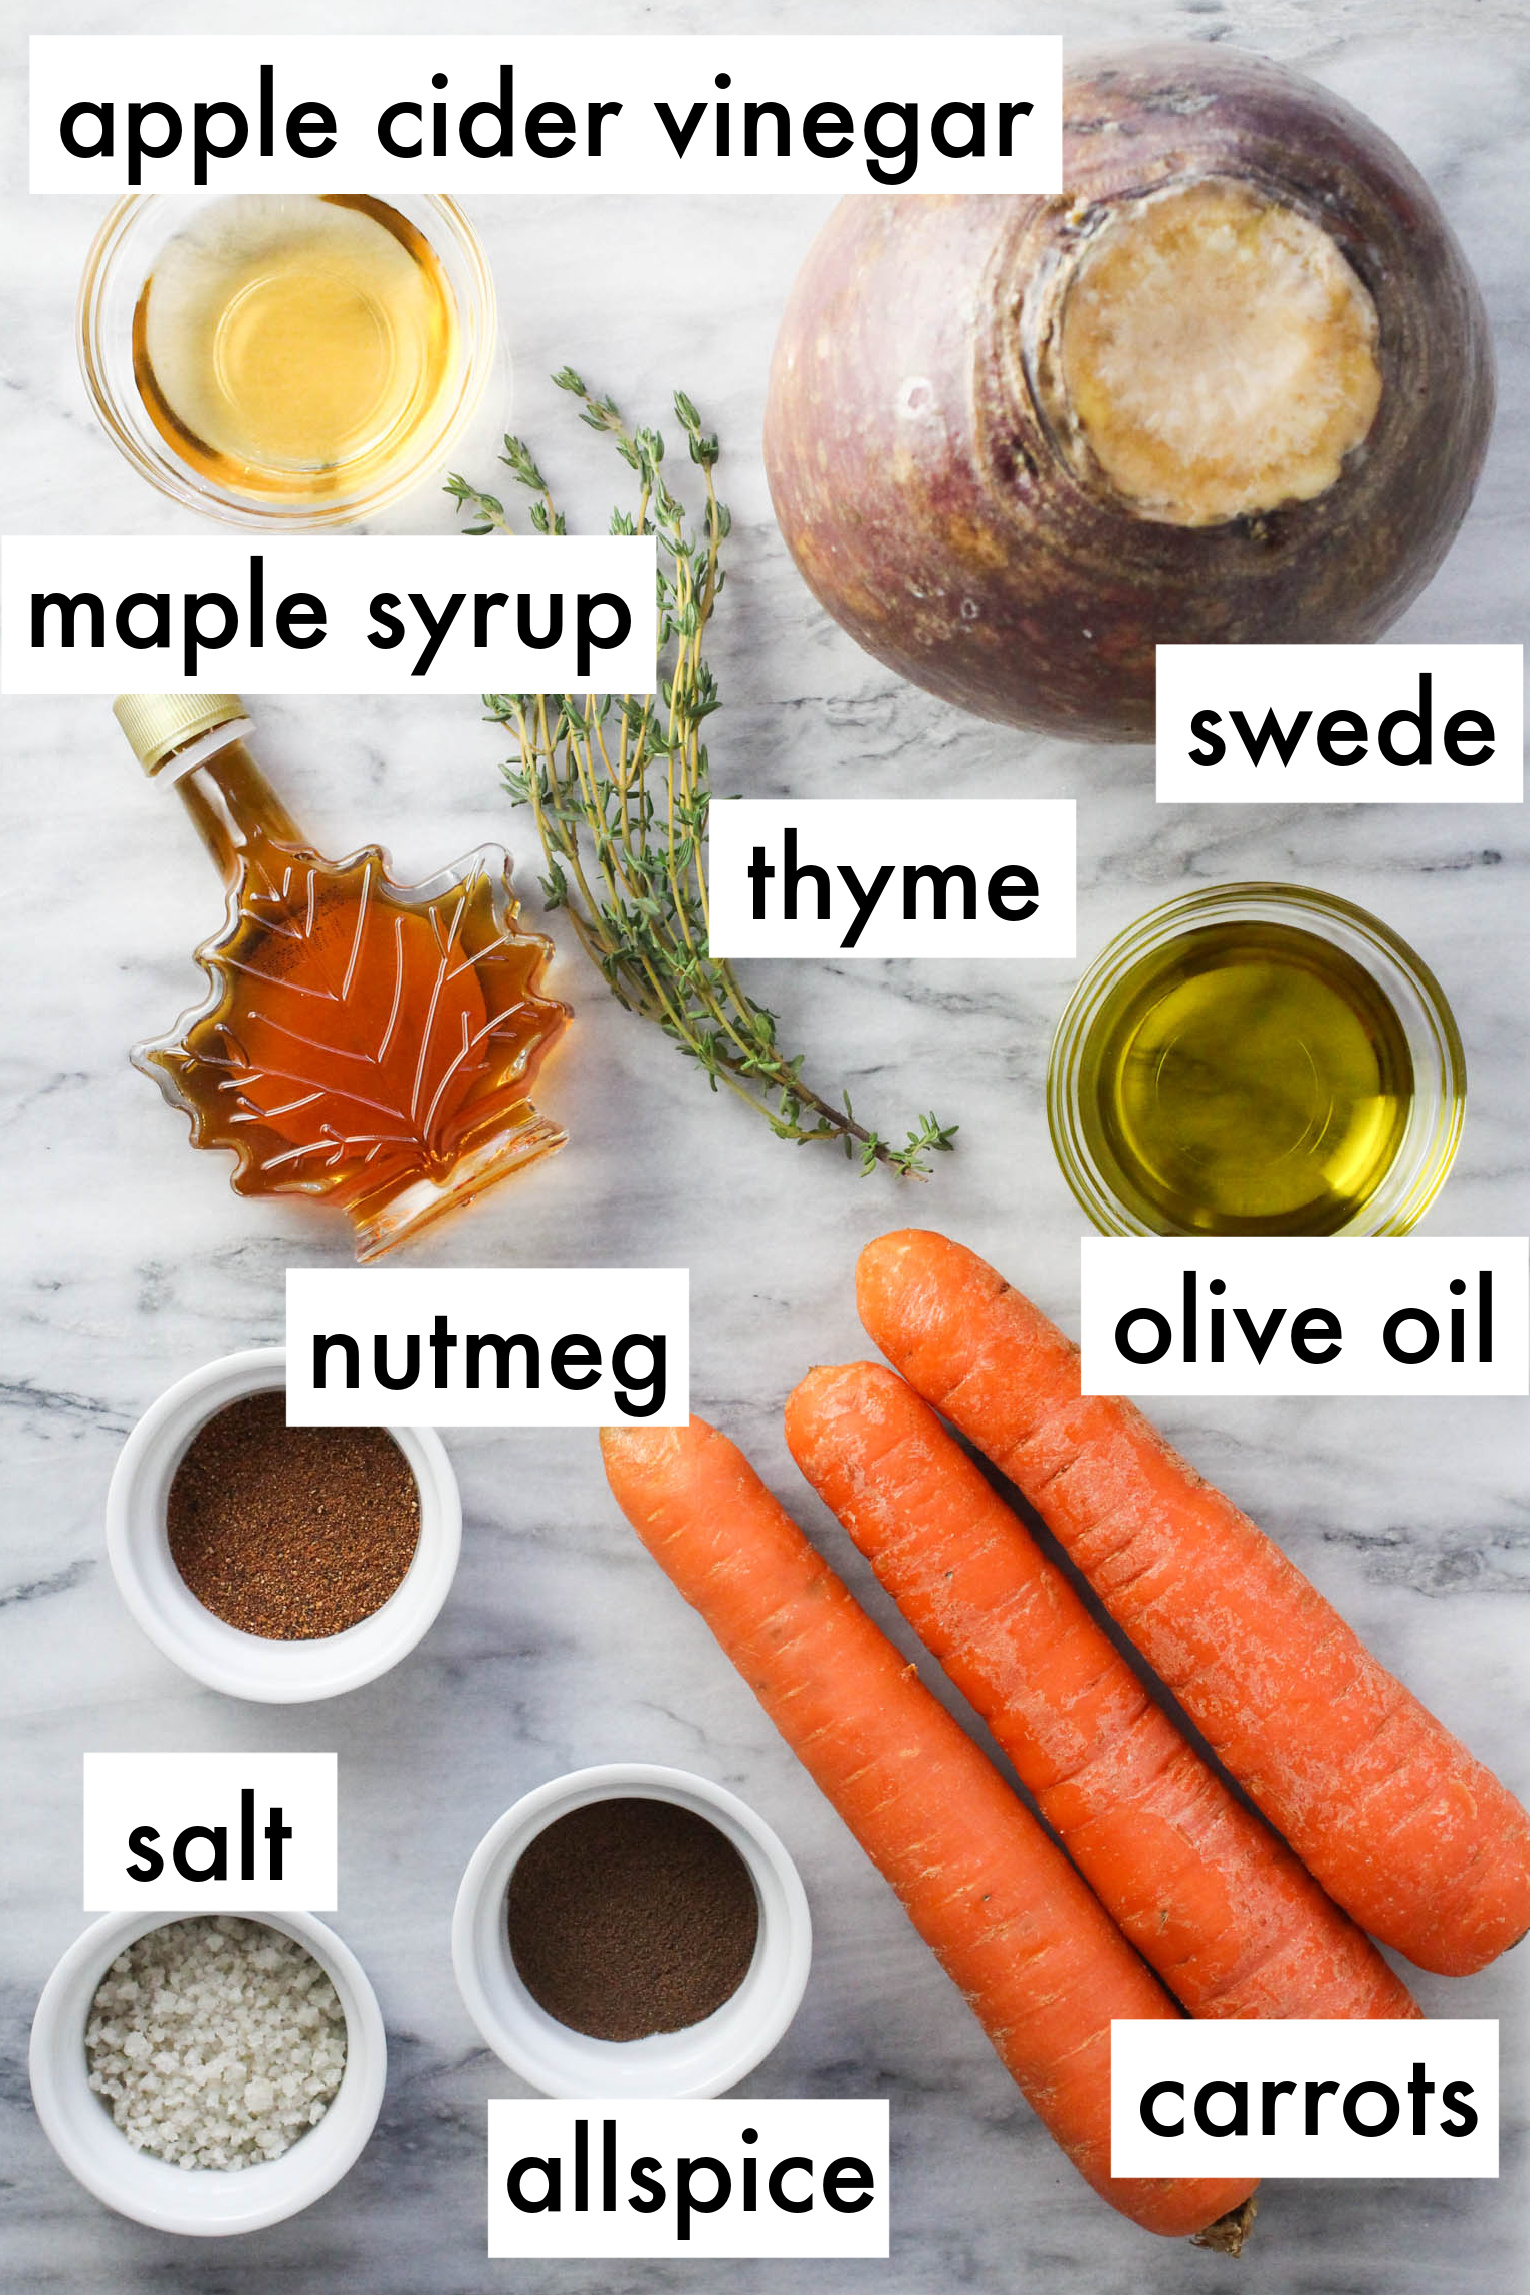 The ingredients for the mash displayed on marble background. The ingredients are labeled as follows: apple cider vinegar, maple syrup, swede, thyme, numeg, olive oil, salt, allspice, carrots.